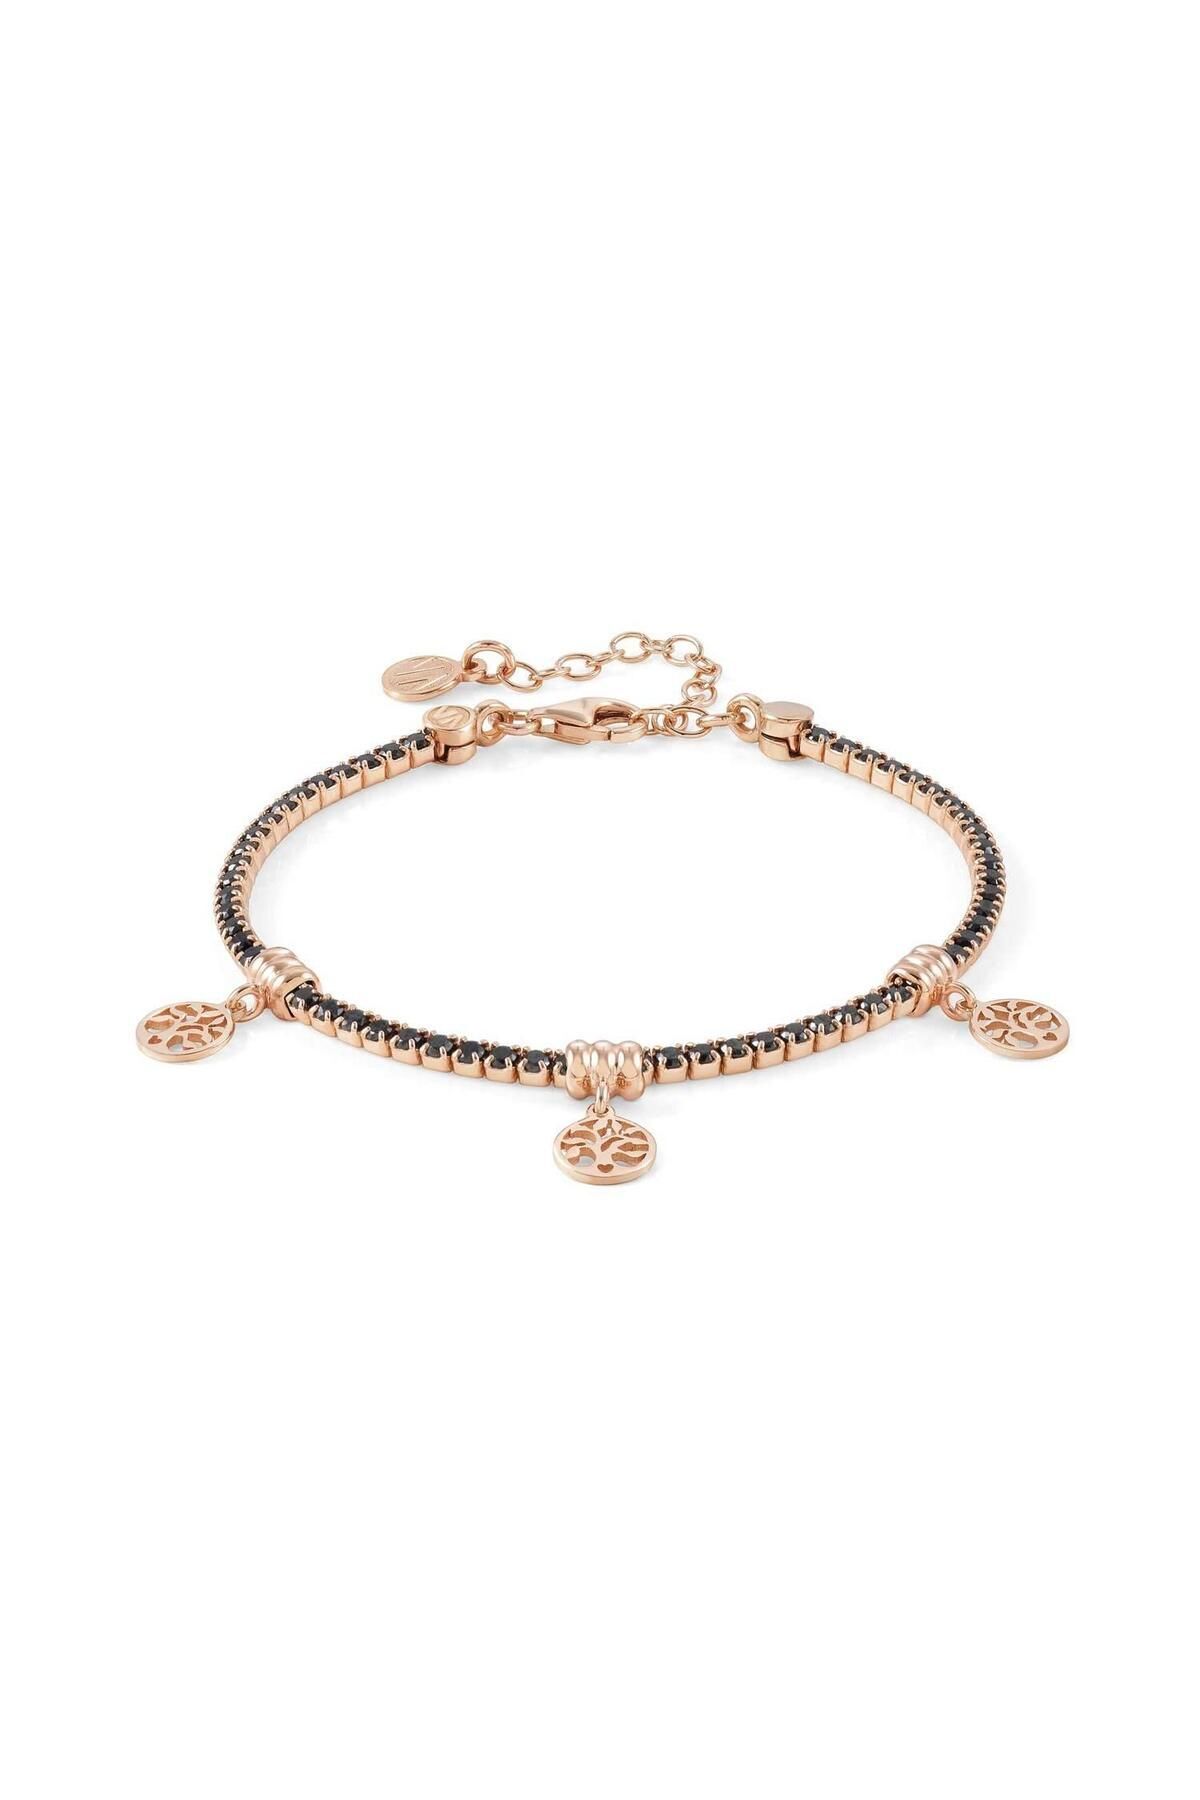 NOMİNATİON Chıc&charm Bracelet In 925 Silver And Cubic Zirconia (042_tree Of Life Rosegold)